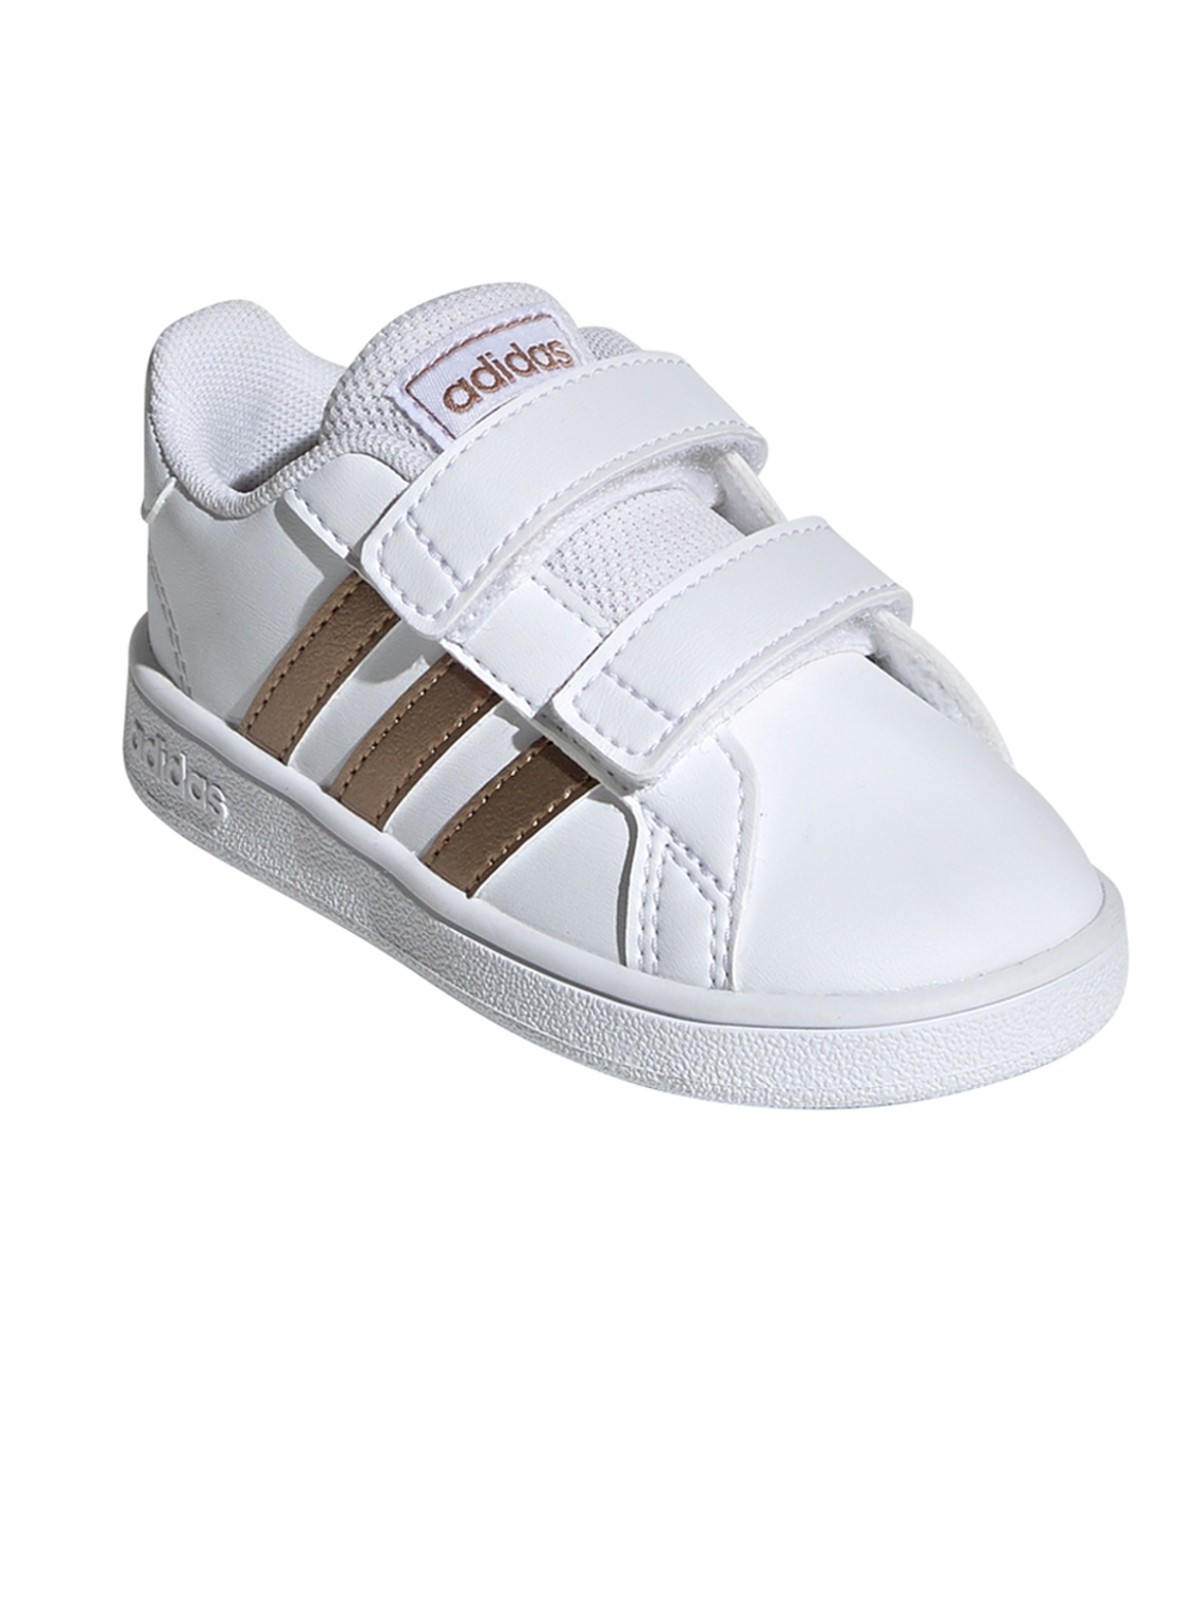 chaussure adidas fille 27